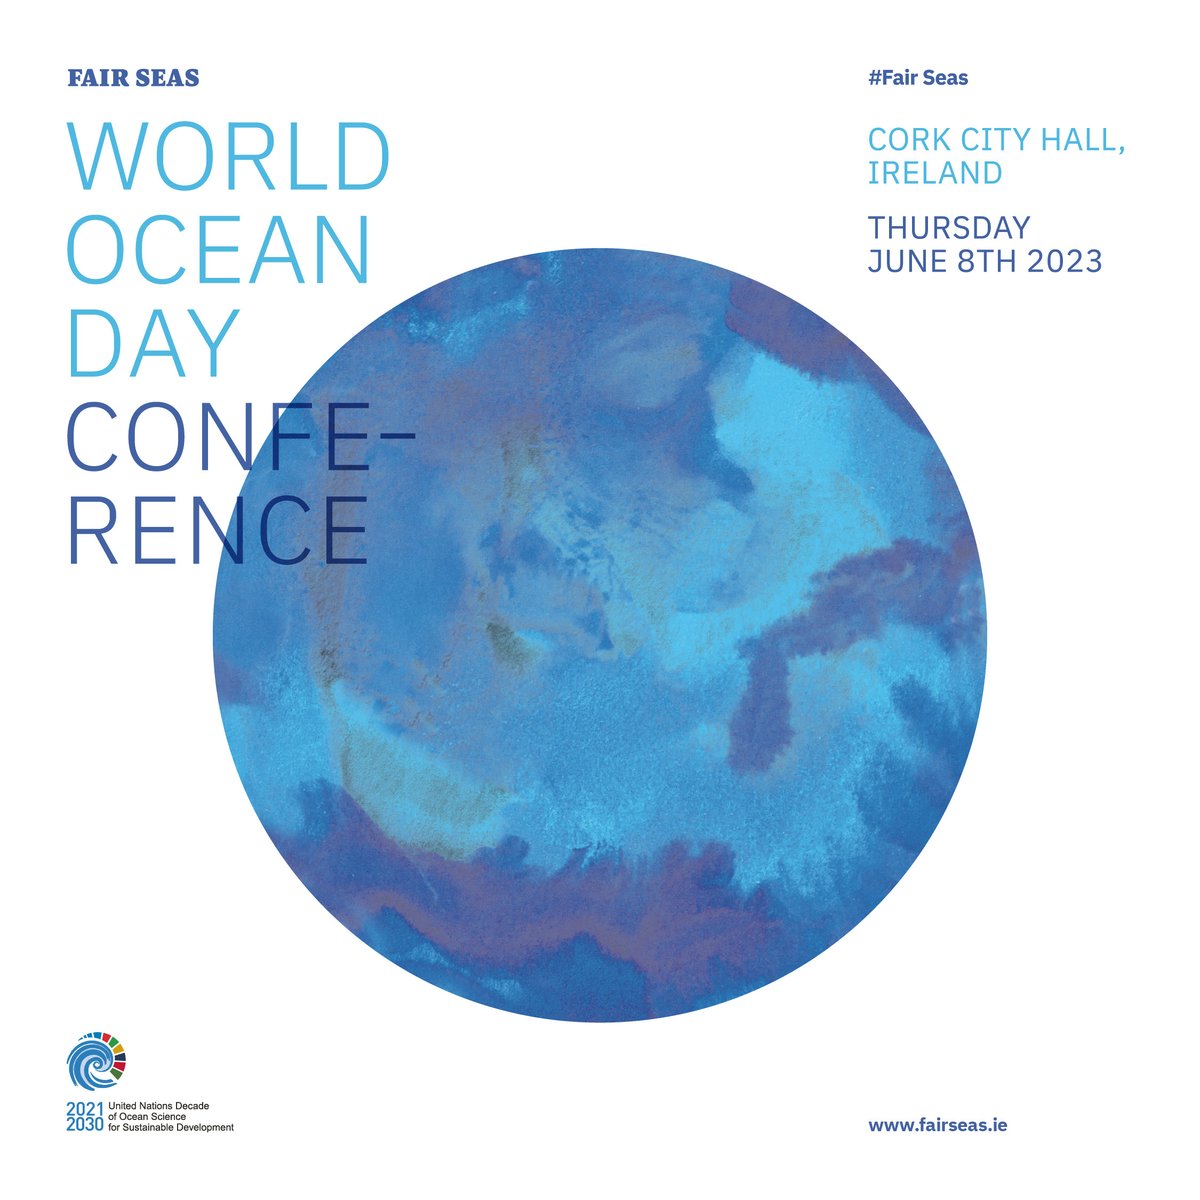 This event is bringing together world-leading experts, Irish stakeholders & Government to discuss the next steps for MPAs in Ireland. Last chance to get your tickets! @EU_MARE ,@UNOceanDecade, @FairSeasIreland 
fairseas.clr.events/event/133176:w…… #FairSeas